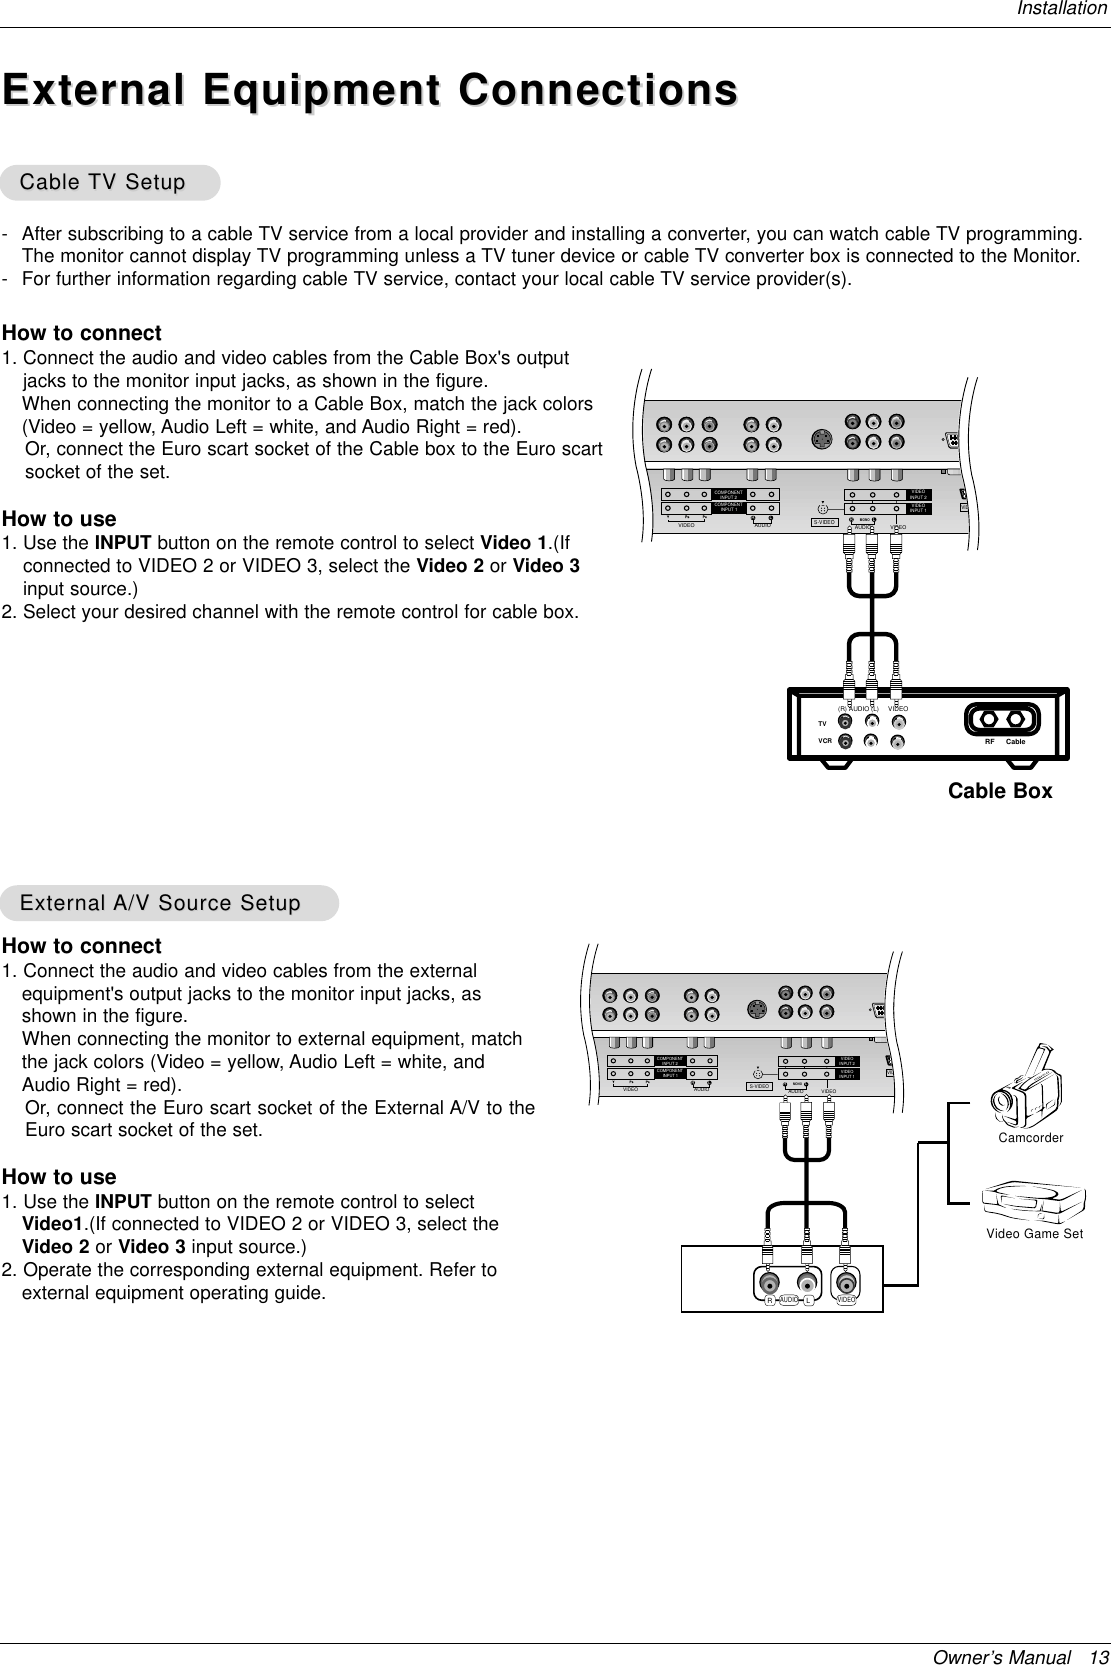 Owner’s Manual   13InstallationExternal Equipment ConnectionsExternal Equipment Connections- After subscribing to a cable TV service from a local provider and installing a converter, you can watch cable TV programming.The monitor cannot display TV programming unless a TV tuner device or cable TV converter box is connected to the Monitor.- For further information regarding cable TV service, contact your local cable TV service provider(s).How to connect1. Connect the audio and video cables from the Cable Box&apos;s outputjacks to the monitor input jacks, as shown in the figure. When connecting the monitor to a Cable Box, match the jack colors(Video = yellow, Audio Left = white, and Audio Right = red).Or, connect the Euro scart socket of the Cable box to the Euro scartsocket of the set.How to use1. Use the INPUT button on the remote control to select Video 1.(Ifconnected to VIDEO 2 or VIDEO 3, select the Video 2 or Video 3input source.)2. Select your desired channel with the remote control for cable box.Cable Cable TV SetupTV SetupAUDIOCOMPONENTCOMPONENTRLVIDEOINPUT 1INPUT 2 VIDEOINPUT 2VIDEOINPUT 1VIDEOMONOAUDIORLS-VIDEOVIDTVVCR RF Cable (R) AUDIO (L) VIDEOCable BoxHow to connect1. Connect the audio and video cables from the externalequipment&apos;s output jacks to the monitor input jacks, asshown in the figure. When connecting the monitor to external equipment, matchthe jack colors (Video = yellow, Audio Left = white, andAudio Right = red).Or, connect the Euro scart socket of the External A/V to theEuro scart socket of the set.How to use1. Use the INPUT button on the remote control to selectVideo1.(If connected to VIDEO 2 or VIDEO 3, select theVideo 2 or Video 3 input source.)2. Operate the corresponding external equipment. Refer toexternal equipment operating guide.External External A/V Source SetupA/V Source SetupAUDIOCOMPONENTCOMPONENTRLVIDEOINPUT 1INPUT 2 VIDEOINPUT 2VIDEOINPUT 1VIDEOMONOAUDIORLS-VIDEOVIDRLAUDIO VIDEOVideo Game SetCamcorder